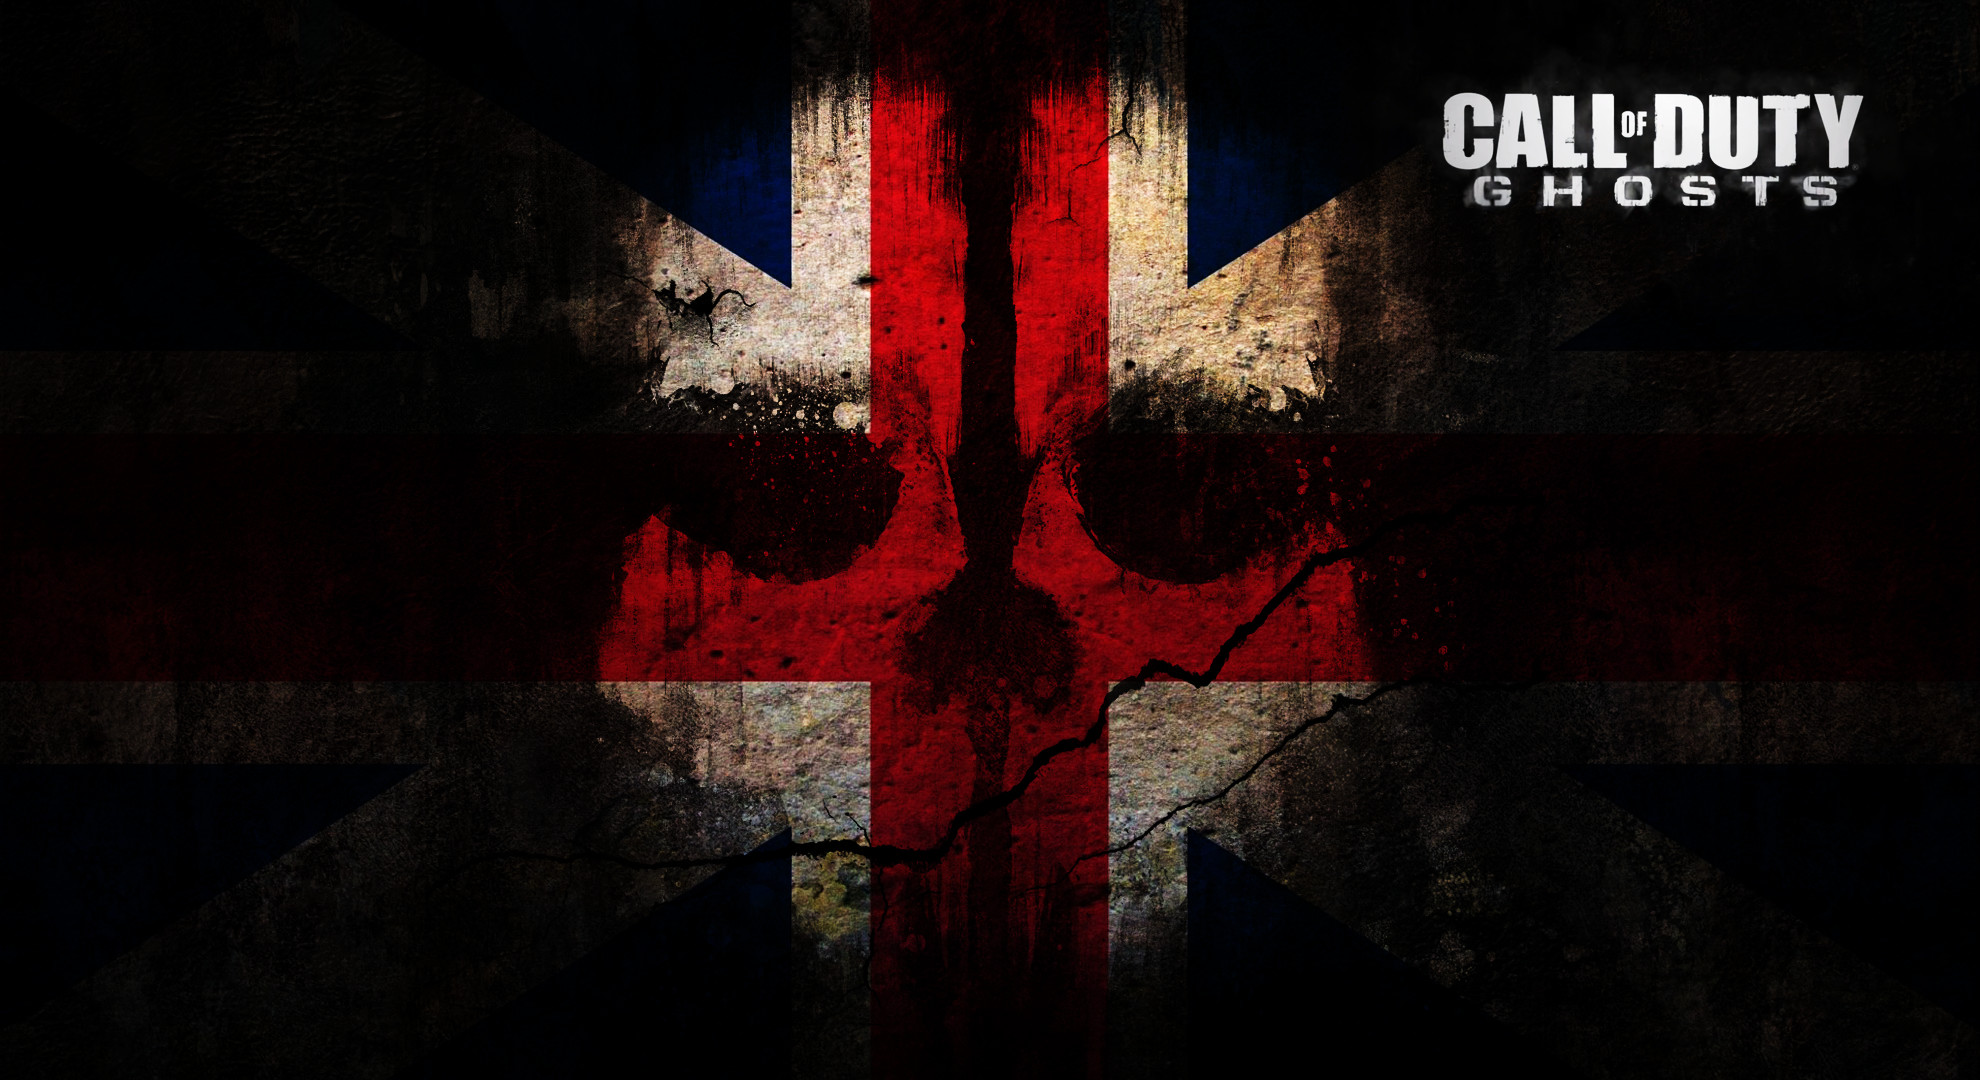 1980x1080 Call Of Duty Ghost Wallpaper, Call Of Duty Ghost Wallpapers | Call .